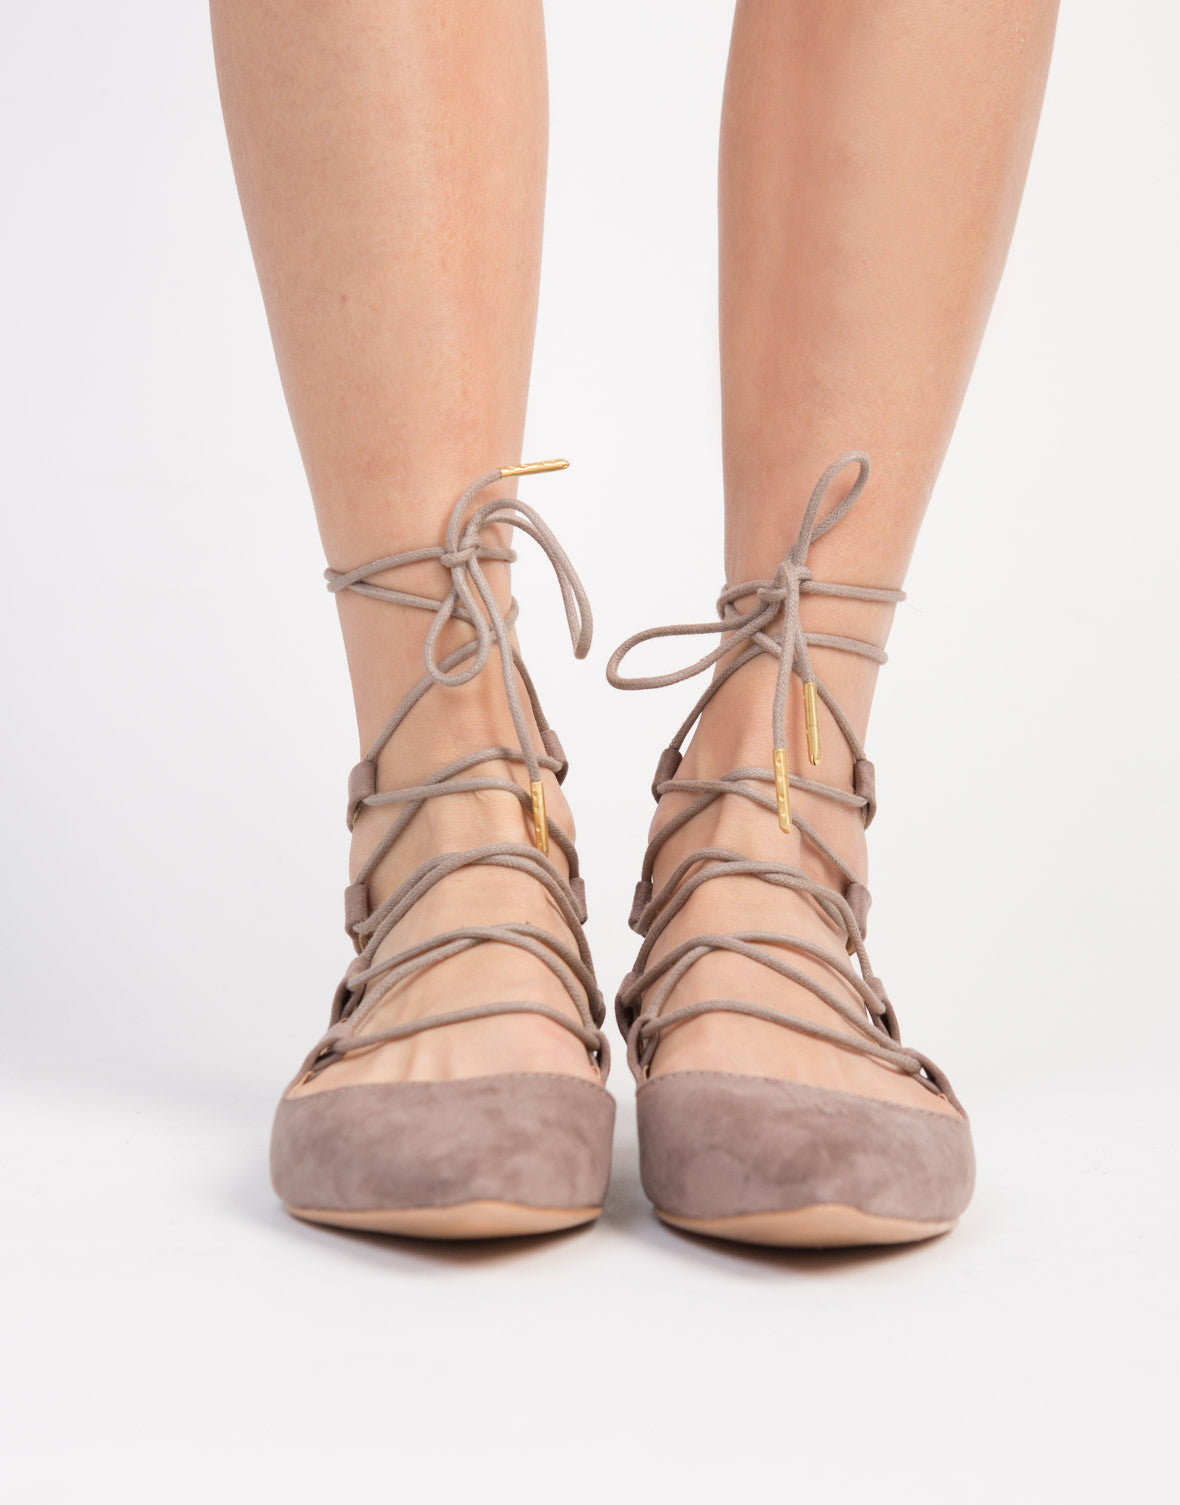 Pointy Lace-Up Flats - Lace Up Ballerina Flats - Brown Tied Up Flats ...